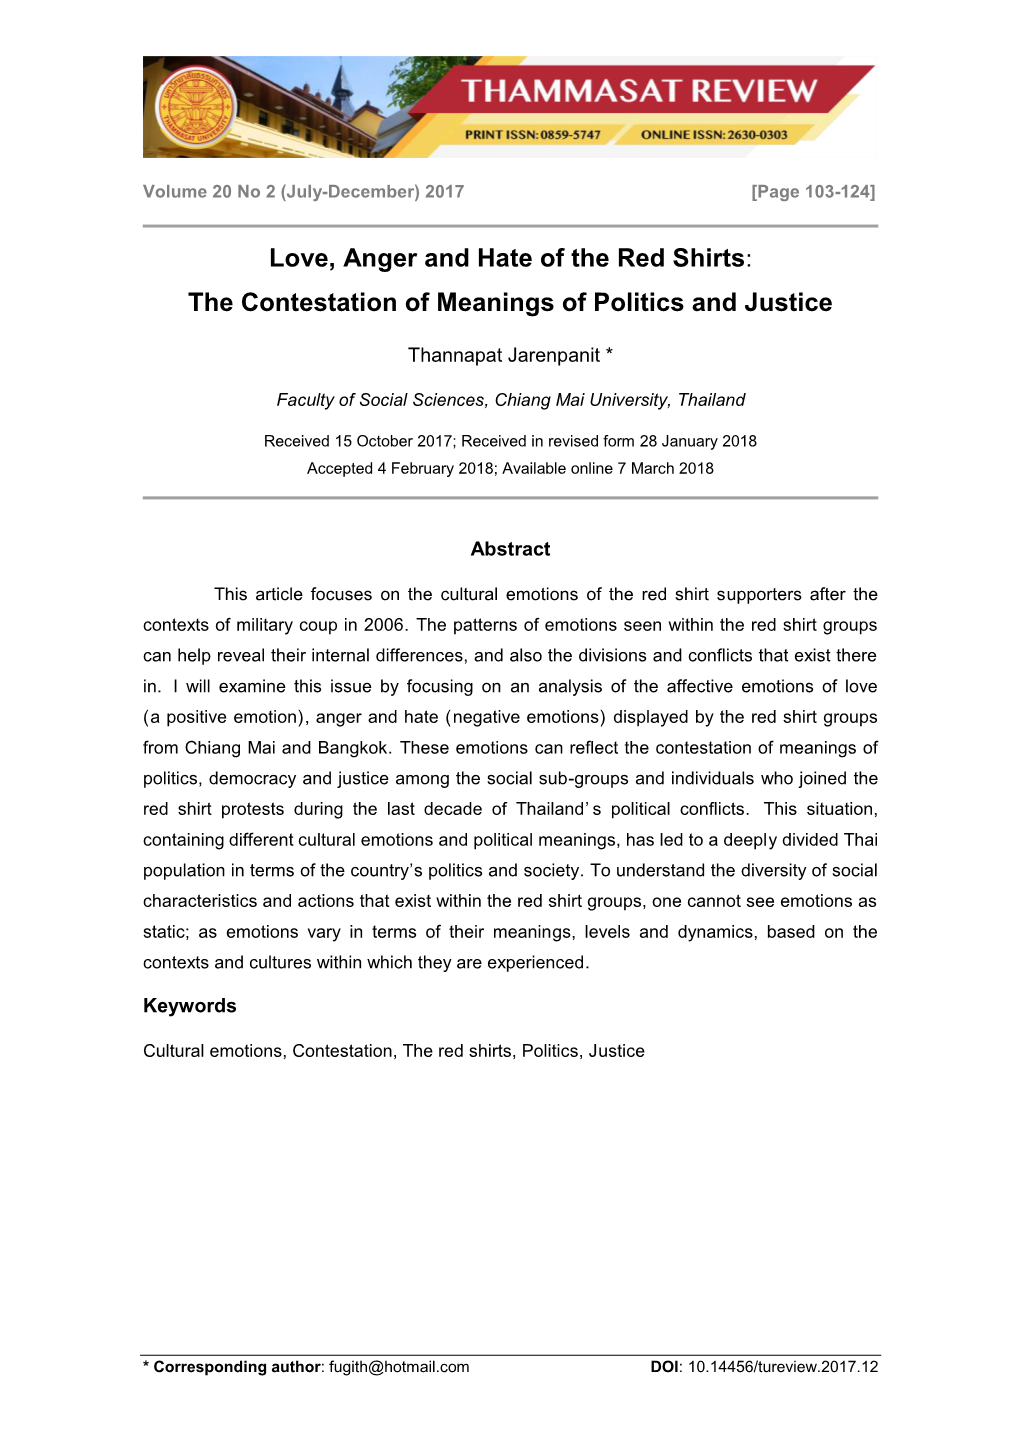 Love, Anger and Hate of the Red Shirts: the Contestation of Meanings of Politics and Justice